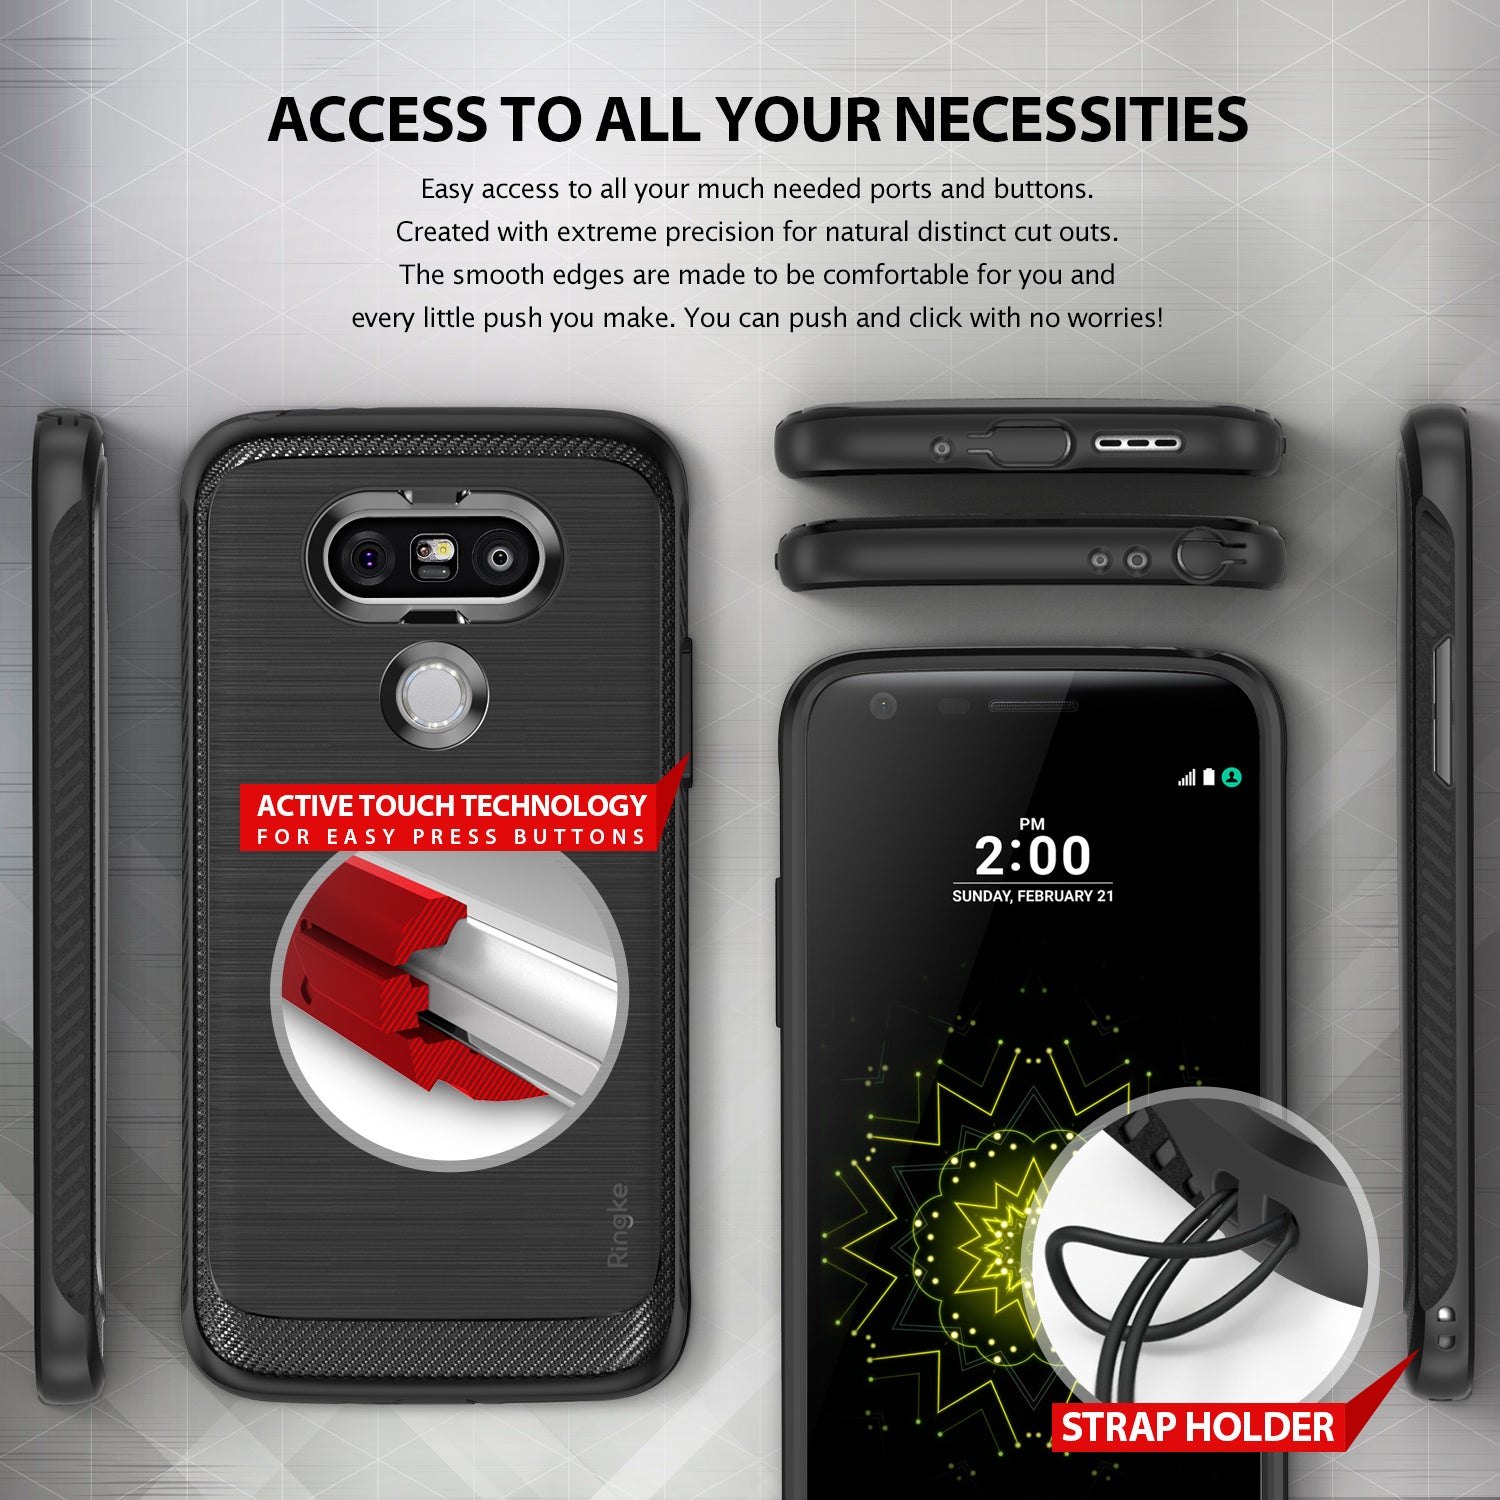 access to gall your necessities